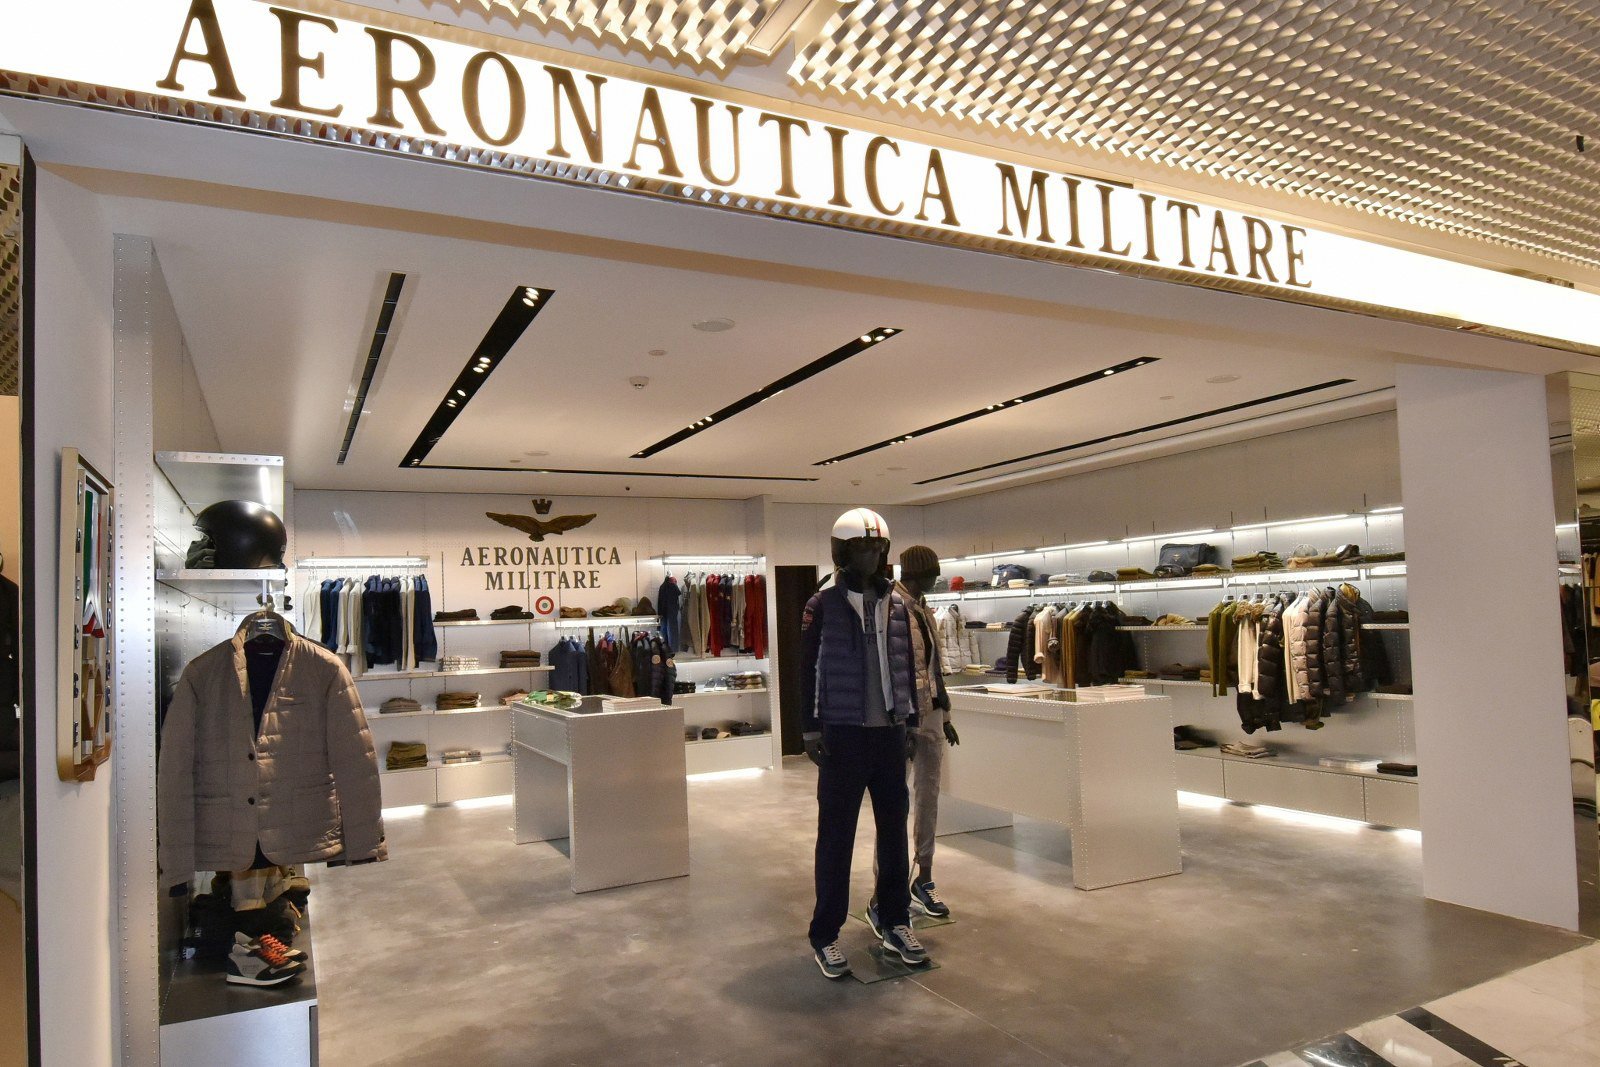 Aeronautica Militare on Twitter: "New Store opened at Beirut! Aïshti By the  Sea Jal El Dib and all Aïzone stores #AeronauticaMilitareOfficialStore  https://t.co/rMJNKLCRcg" / Twitter